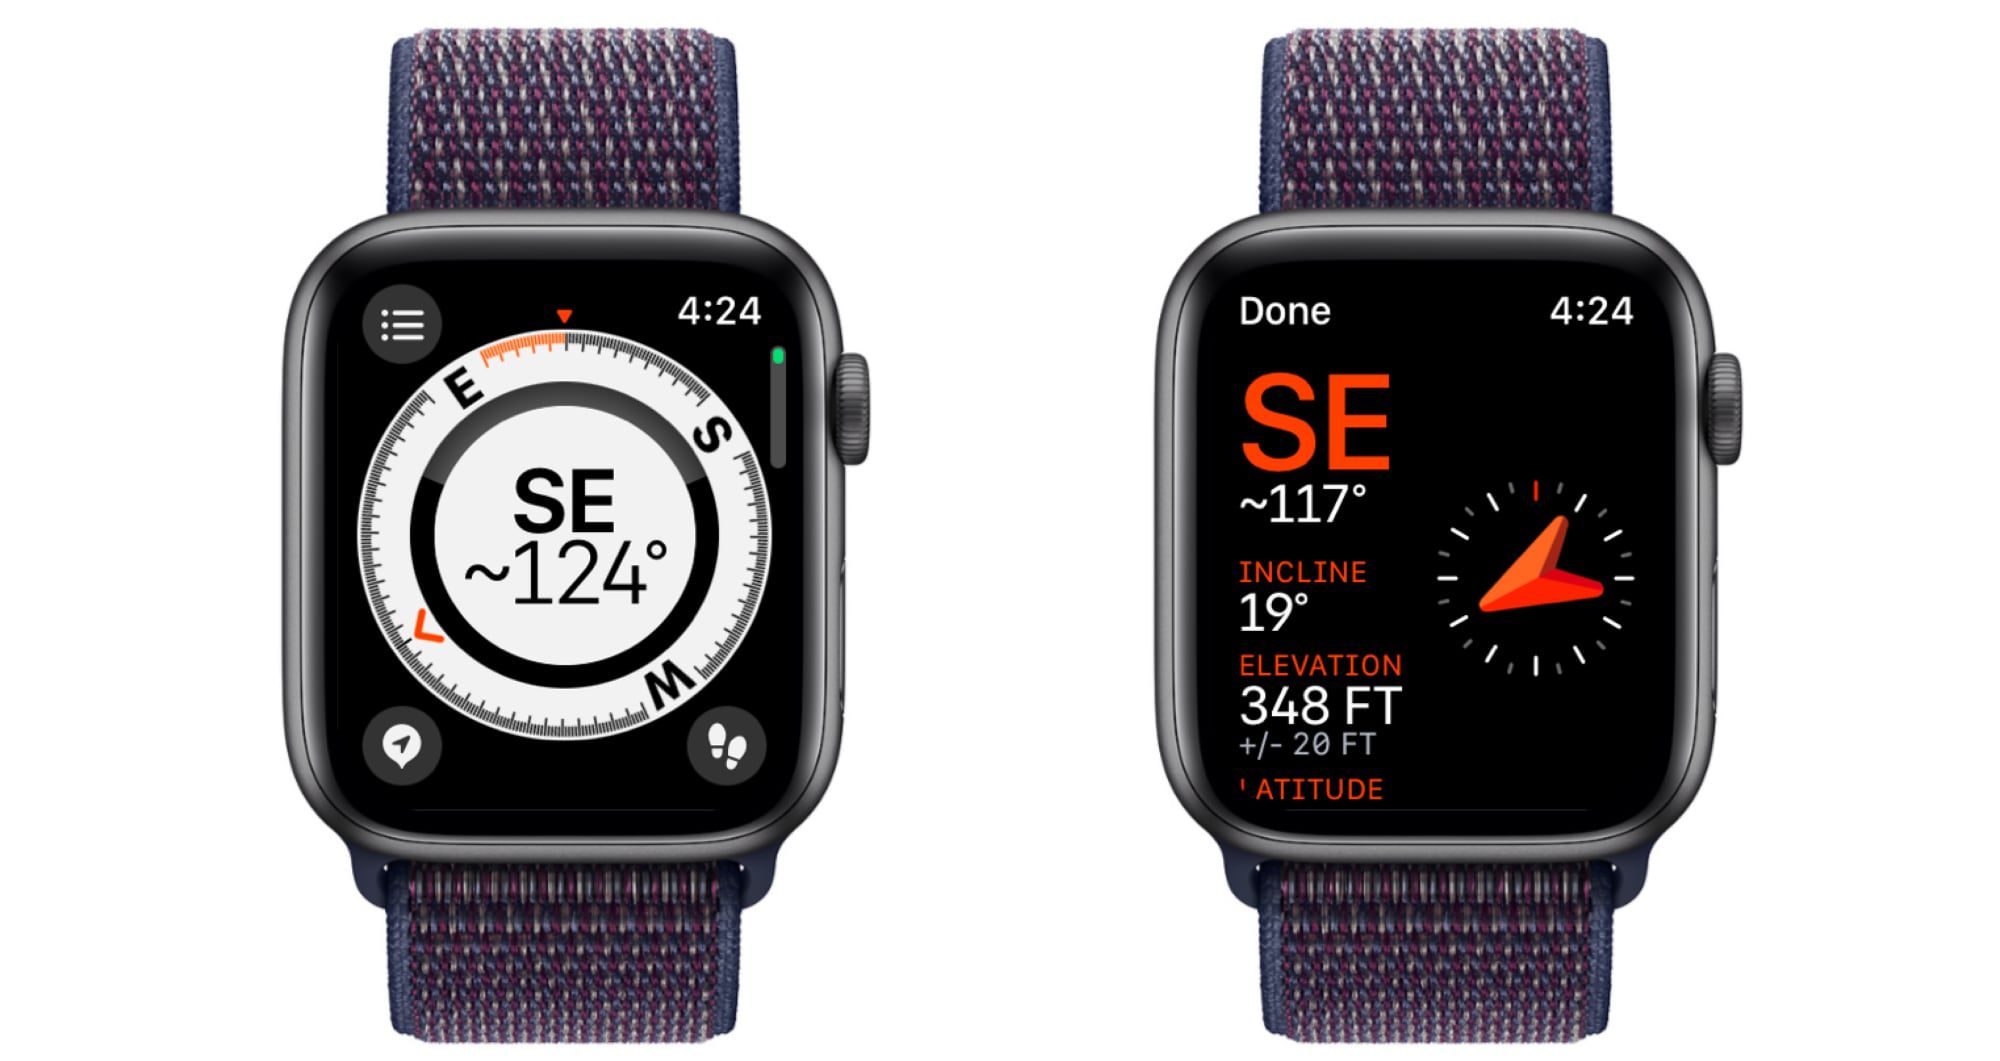 watchos-9-brings-updated-compass-app-with-waypoints-and-backtrack